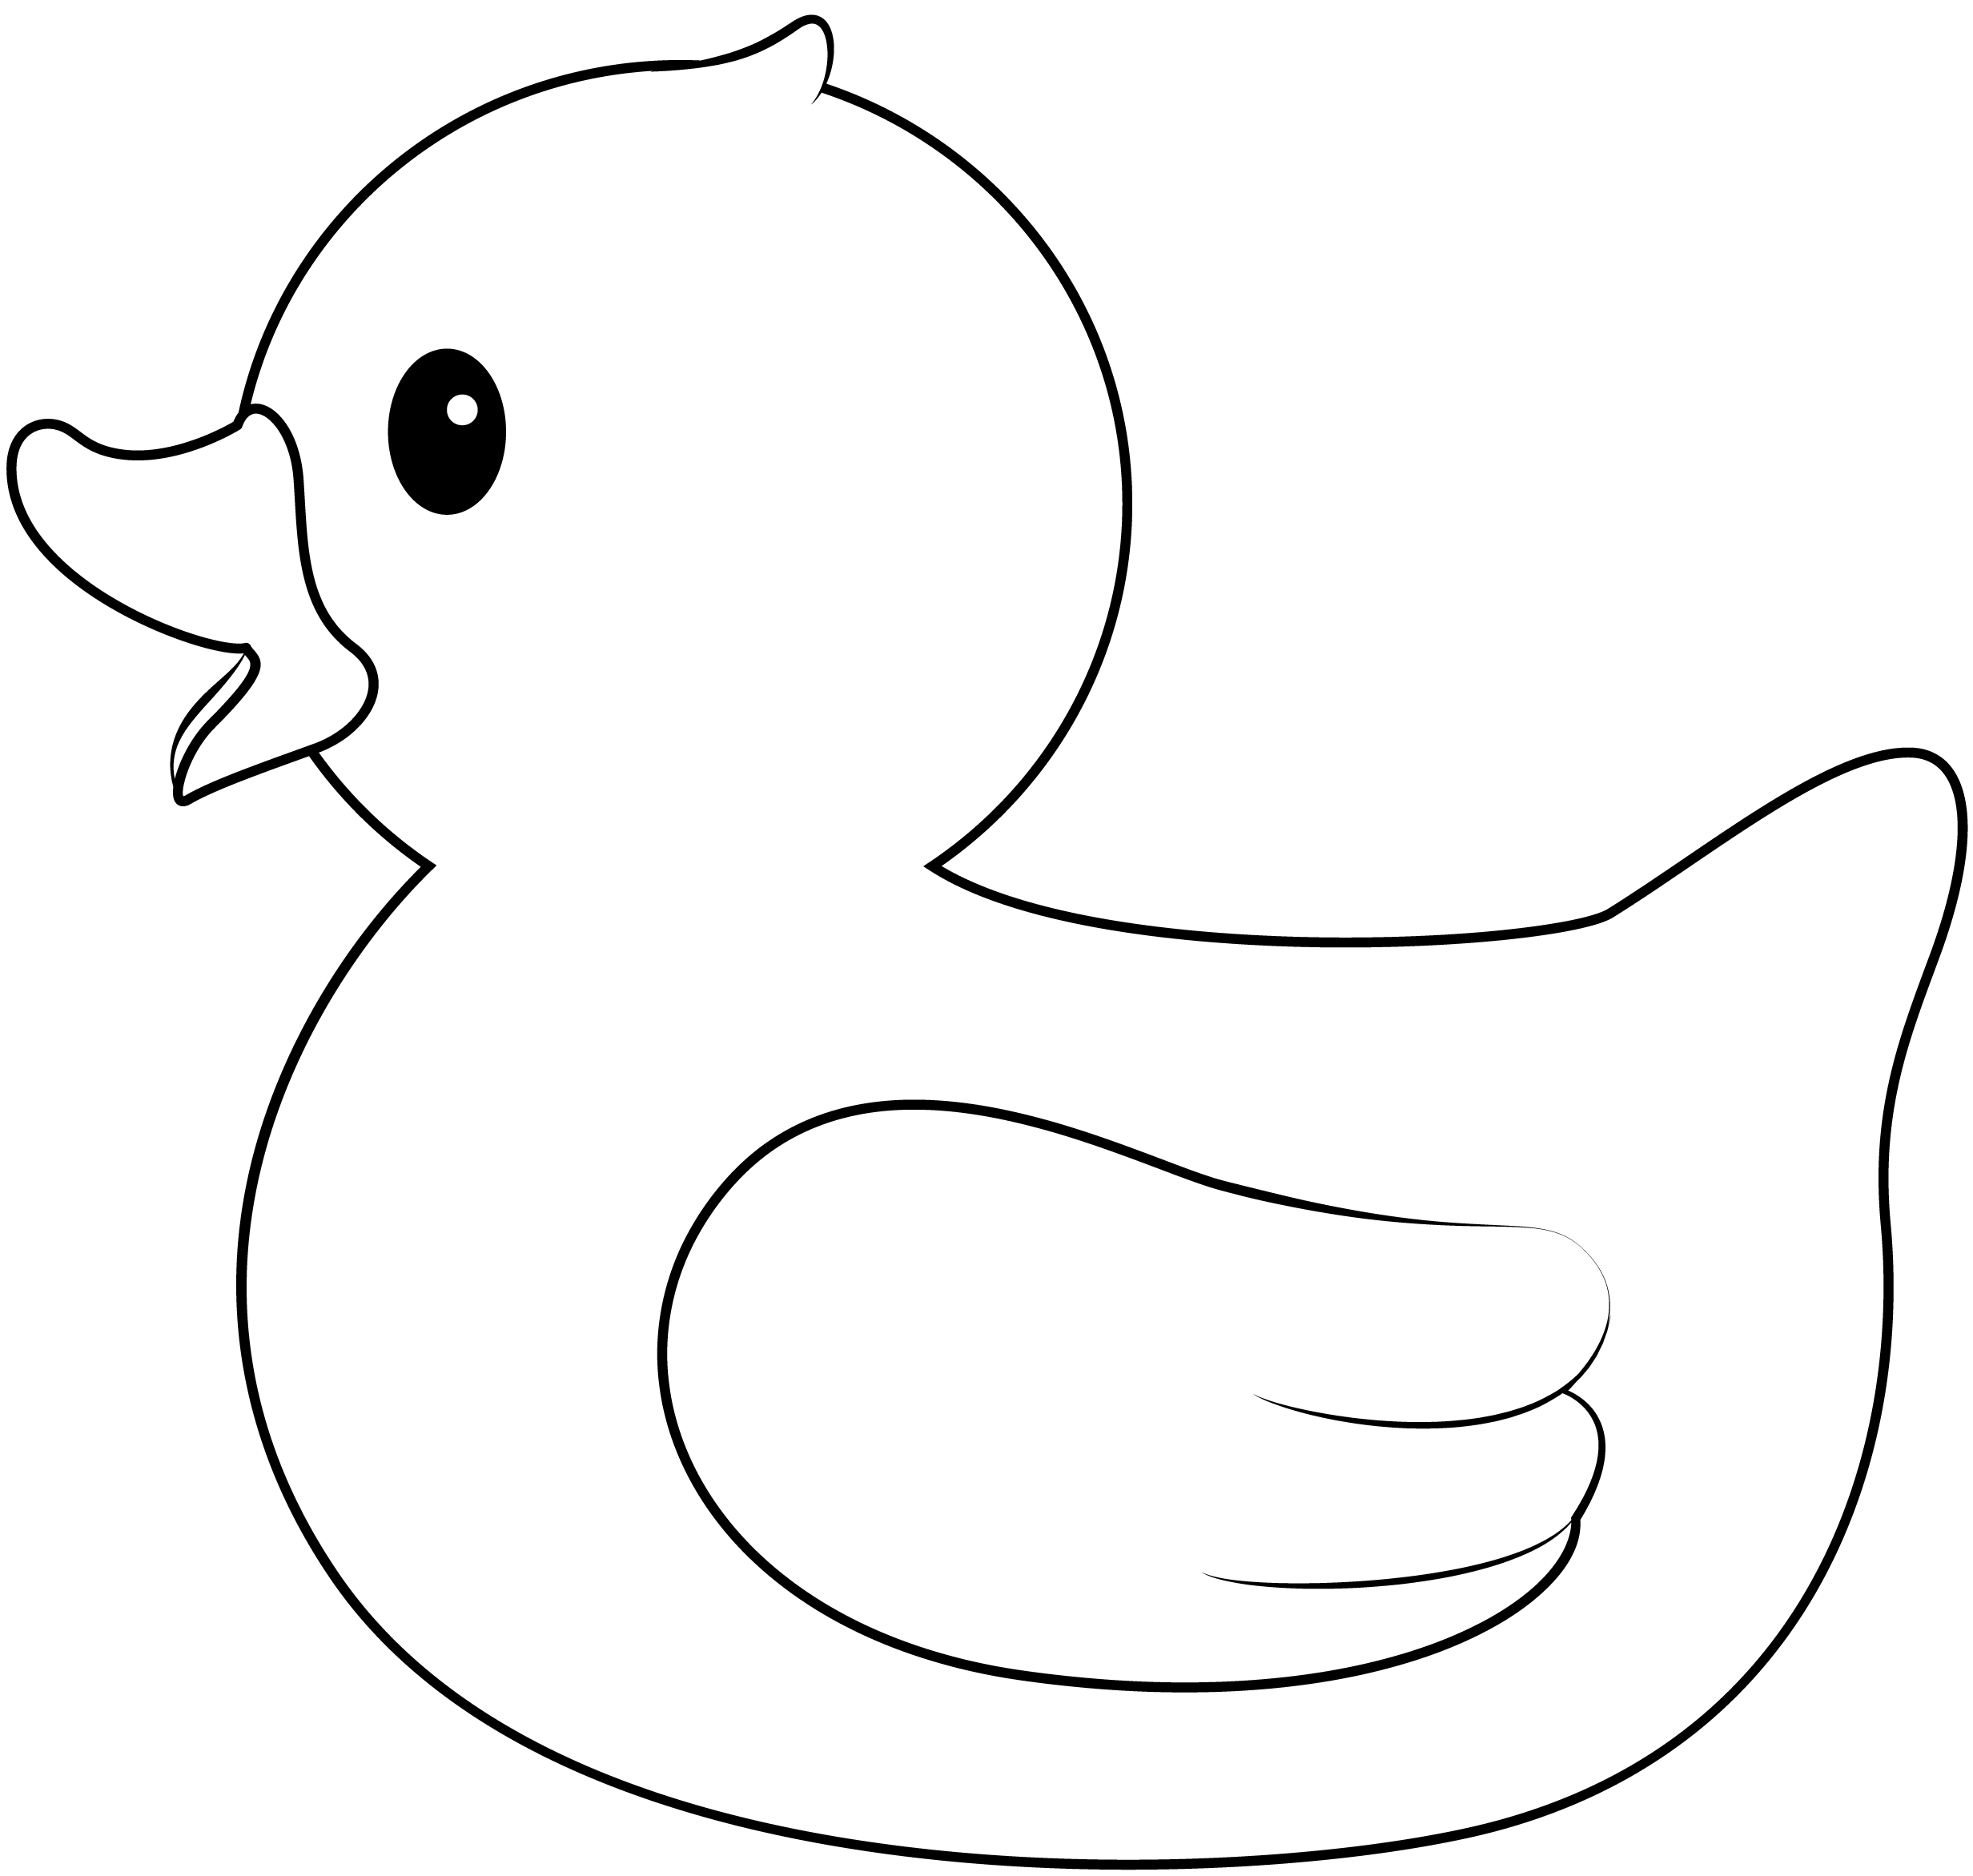 Rubber duck printable template free printable papercraft templates